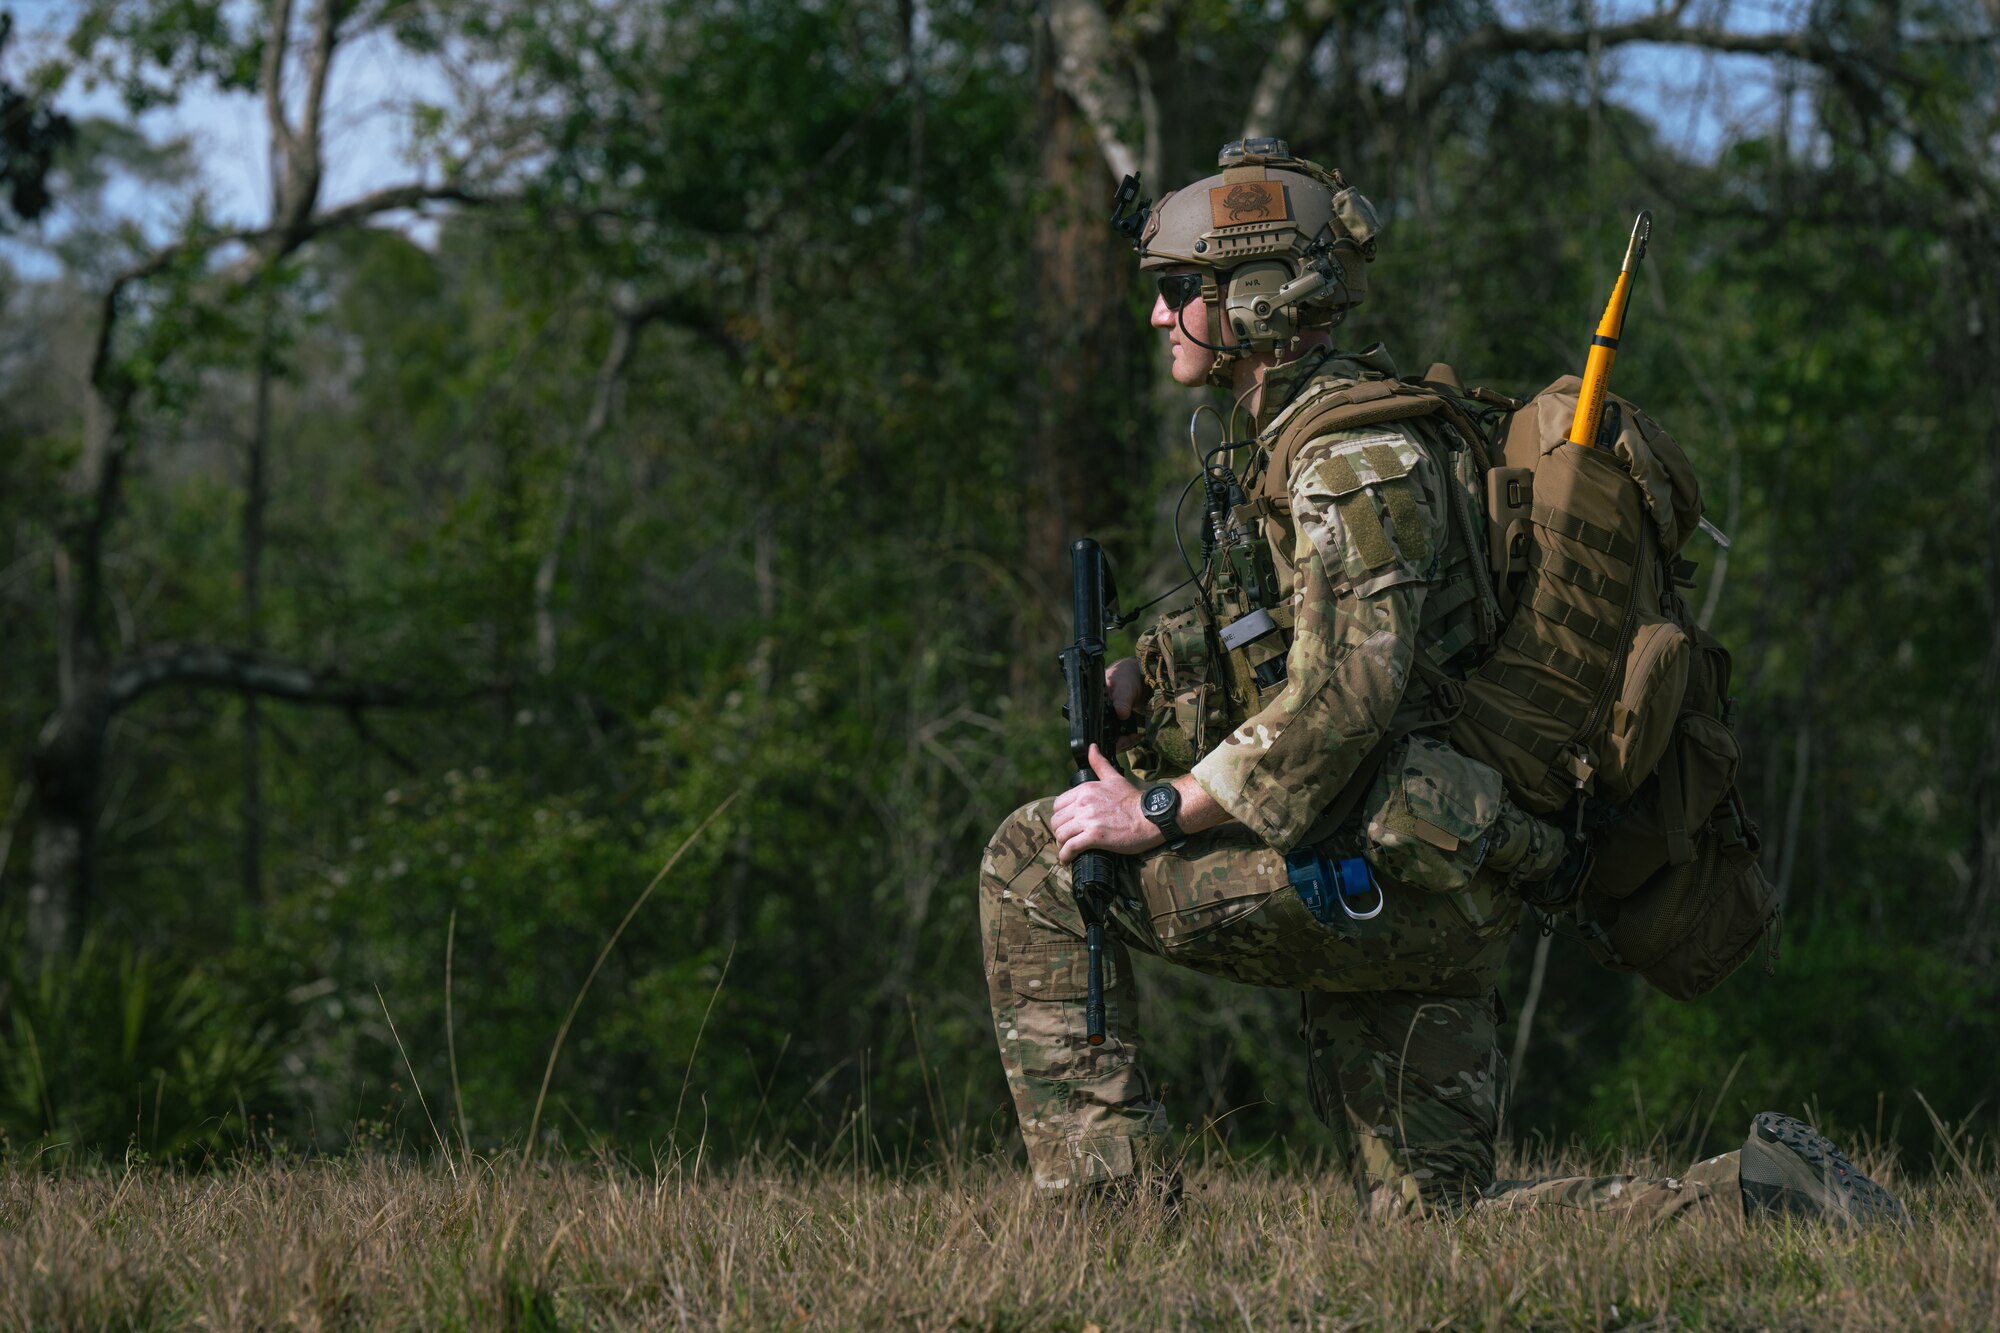 U.S. Air Force Airman 1st Class Walker Rowland, a 1st Special Operations Civil Engineer Squadron explosive ordnance disposal journeyman, stands watch during an exercise.